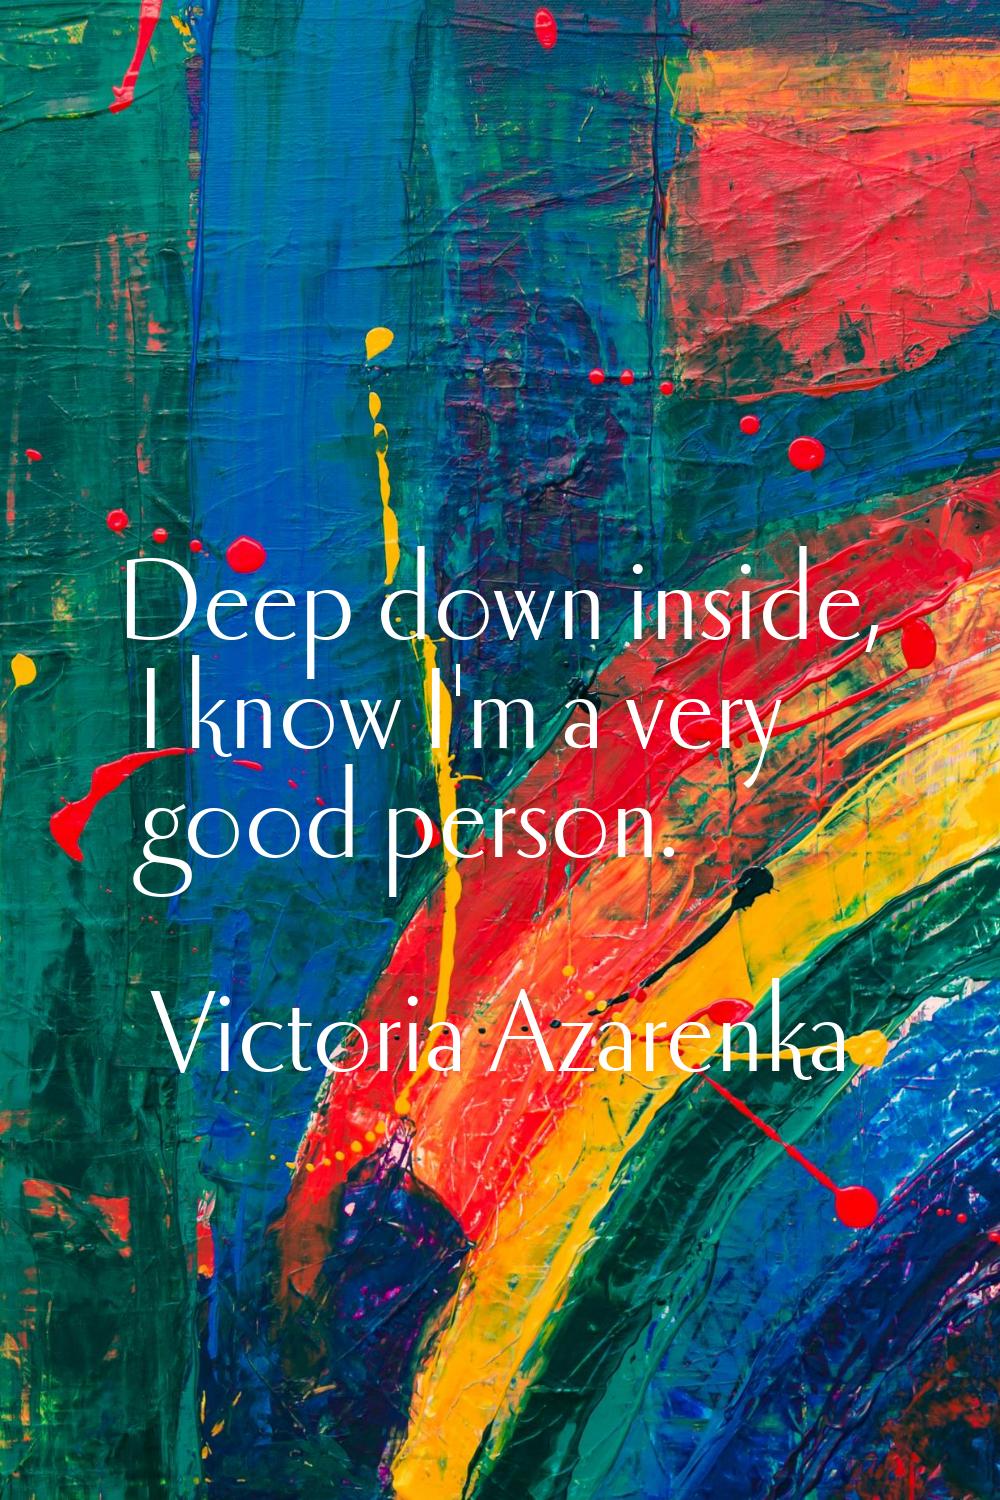 Deep down inside, I know I'm a very good person.